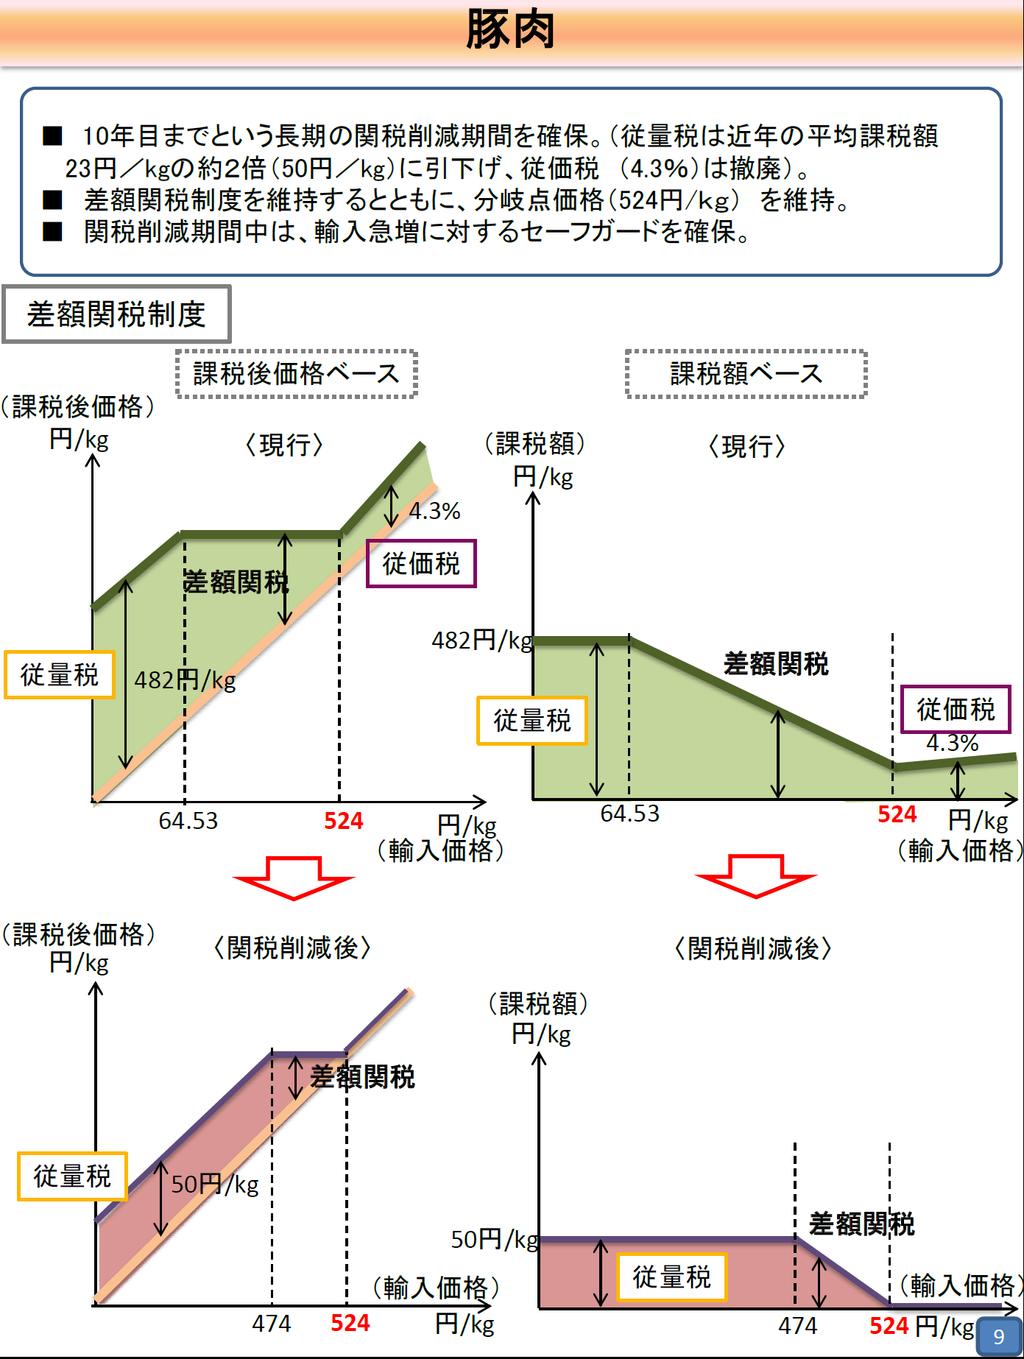 Agreement on Pork (1) Gate pricing system and the turning point price (524 yen /kg) are maintained. (2) A specific duty avoids abolition of tariffs and safeguard measure is introduced.